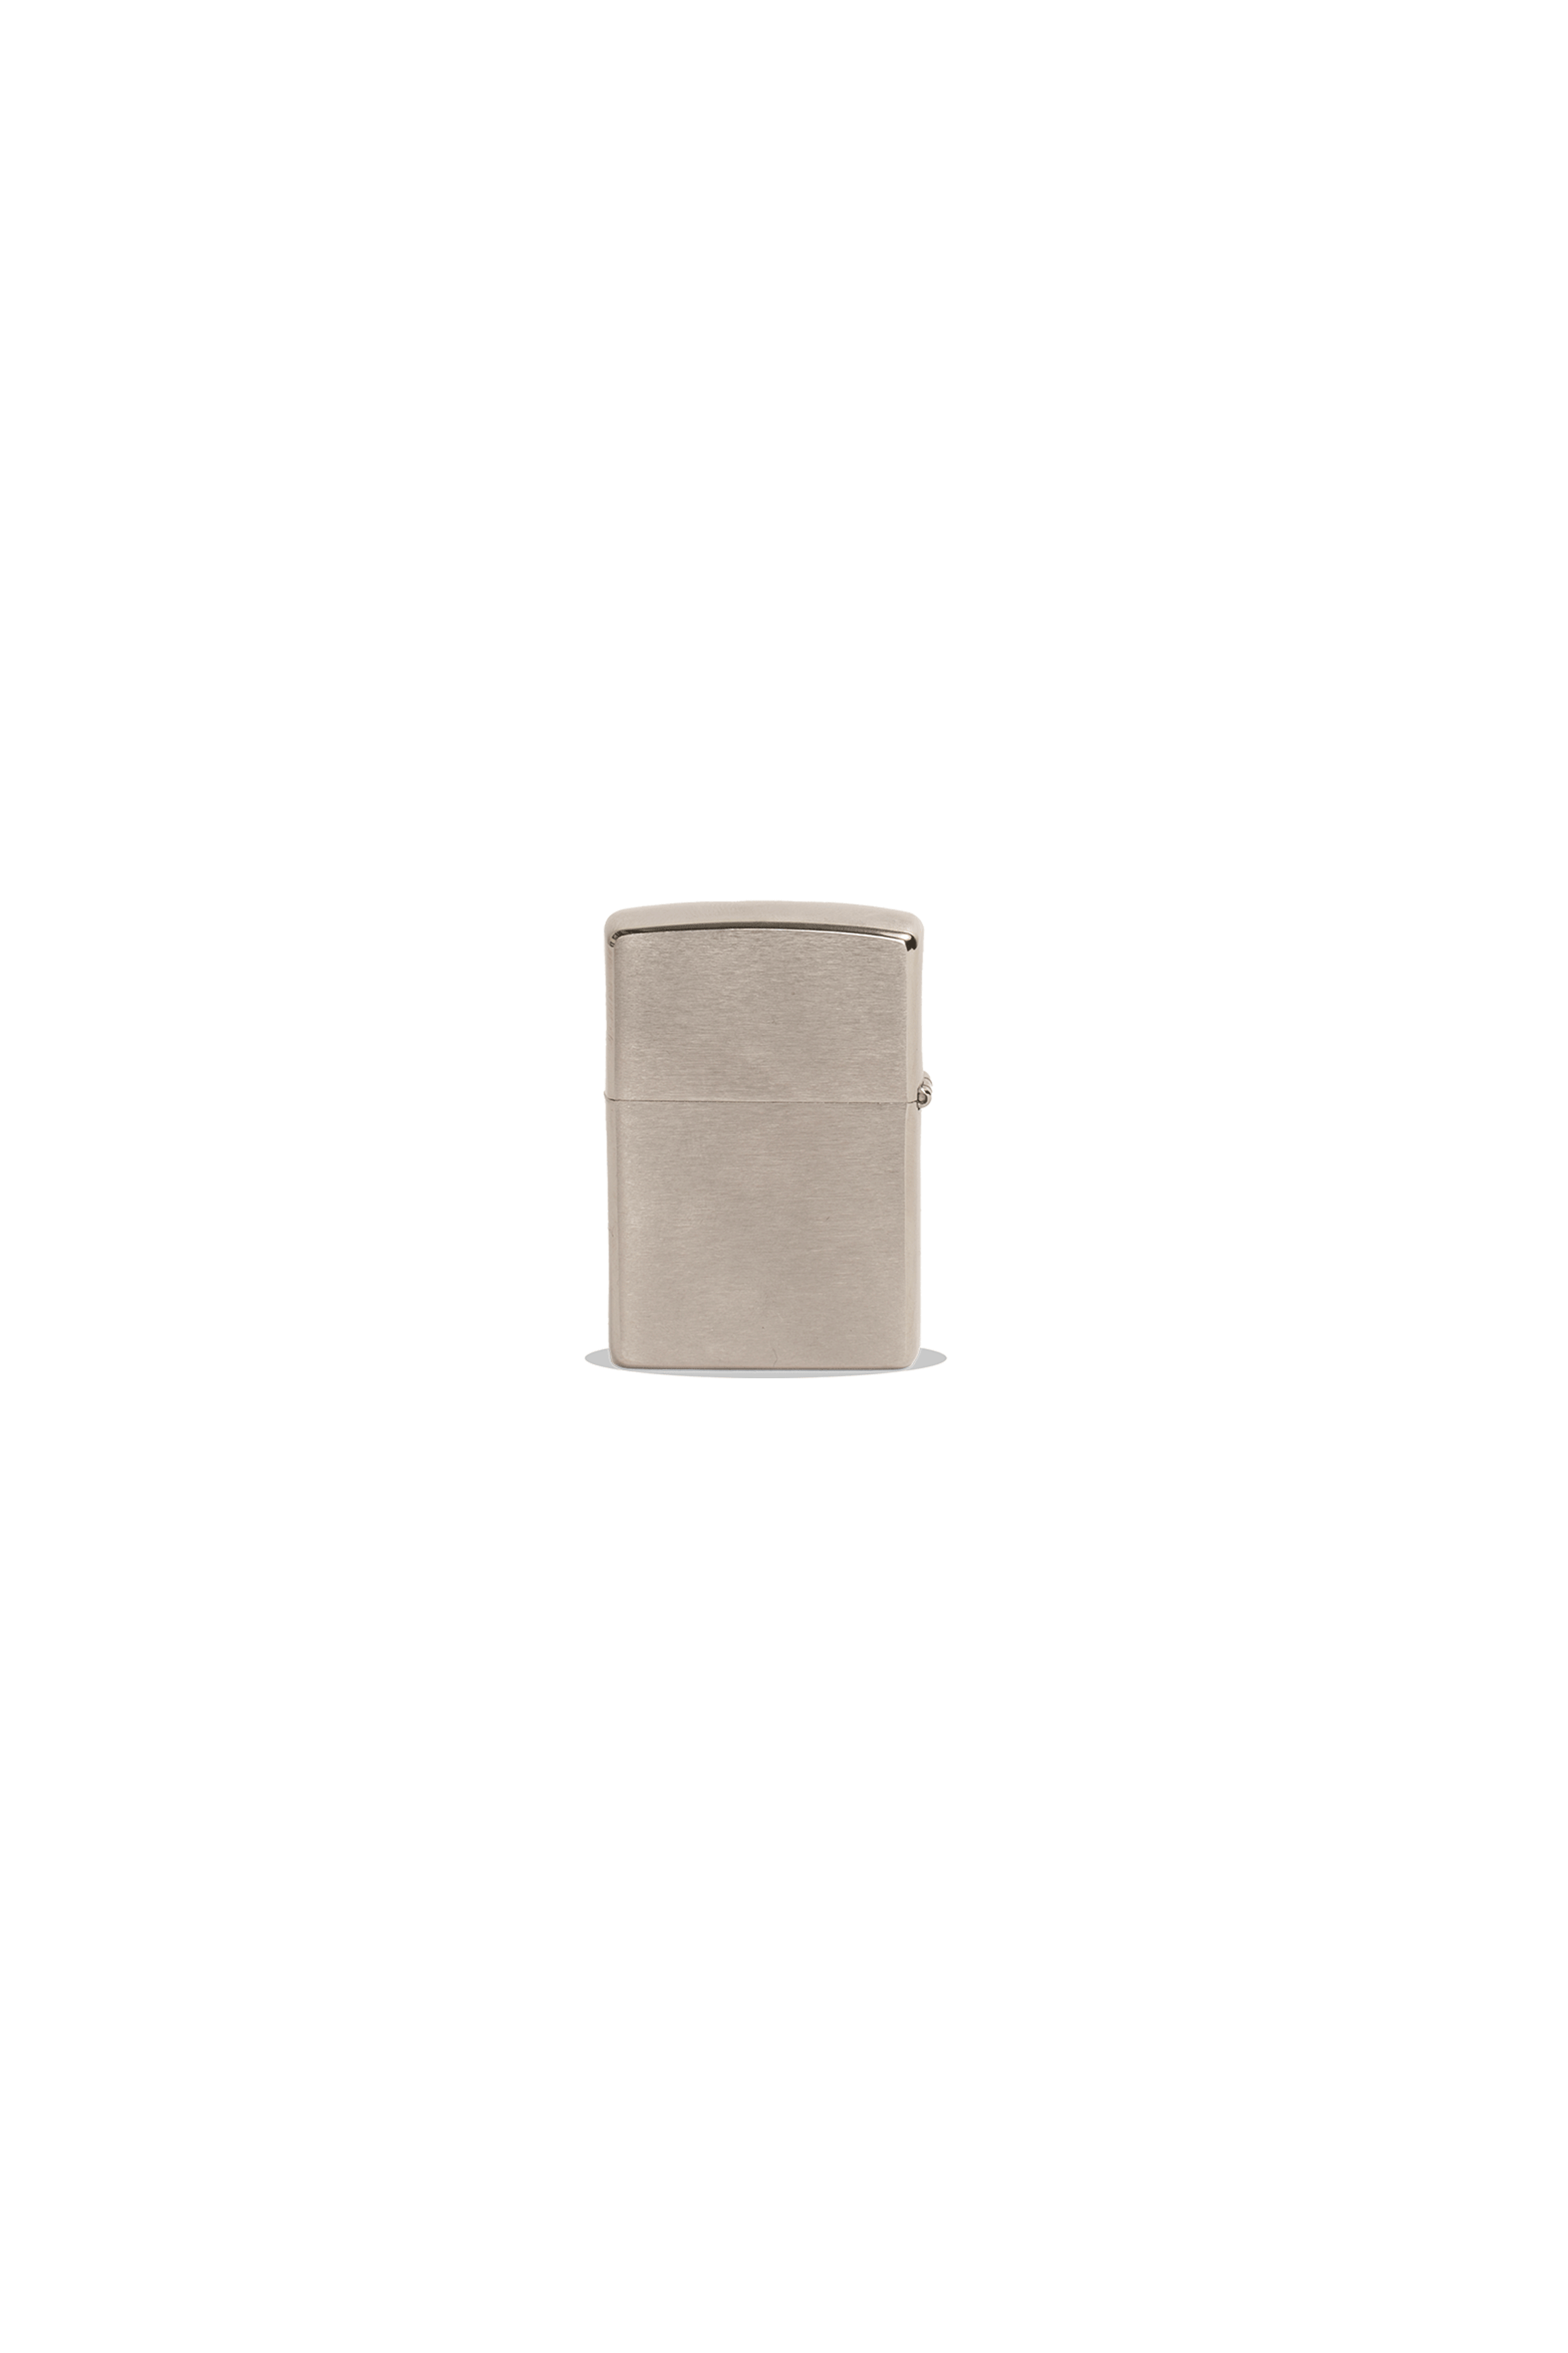 "Fly Away" Classic Brushed Chrome Zippo.